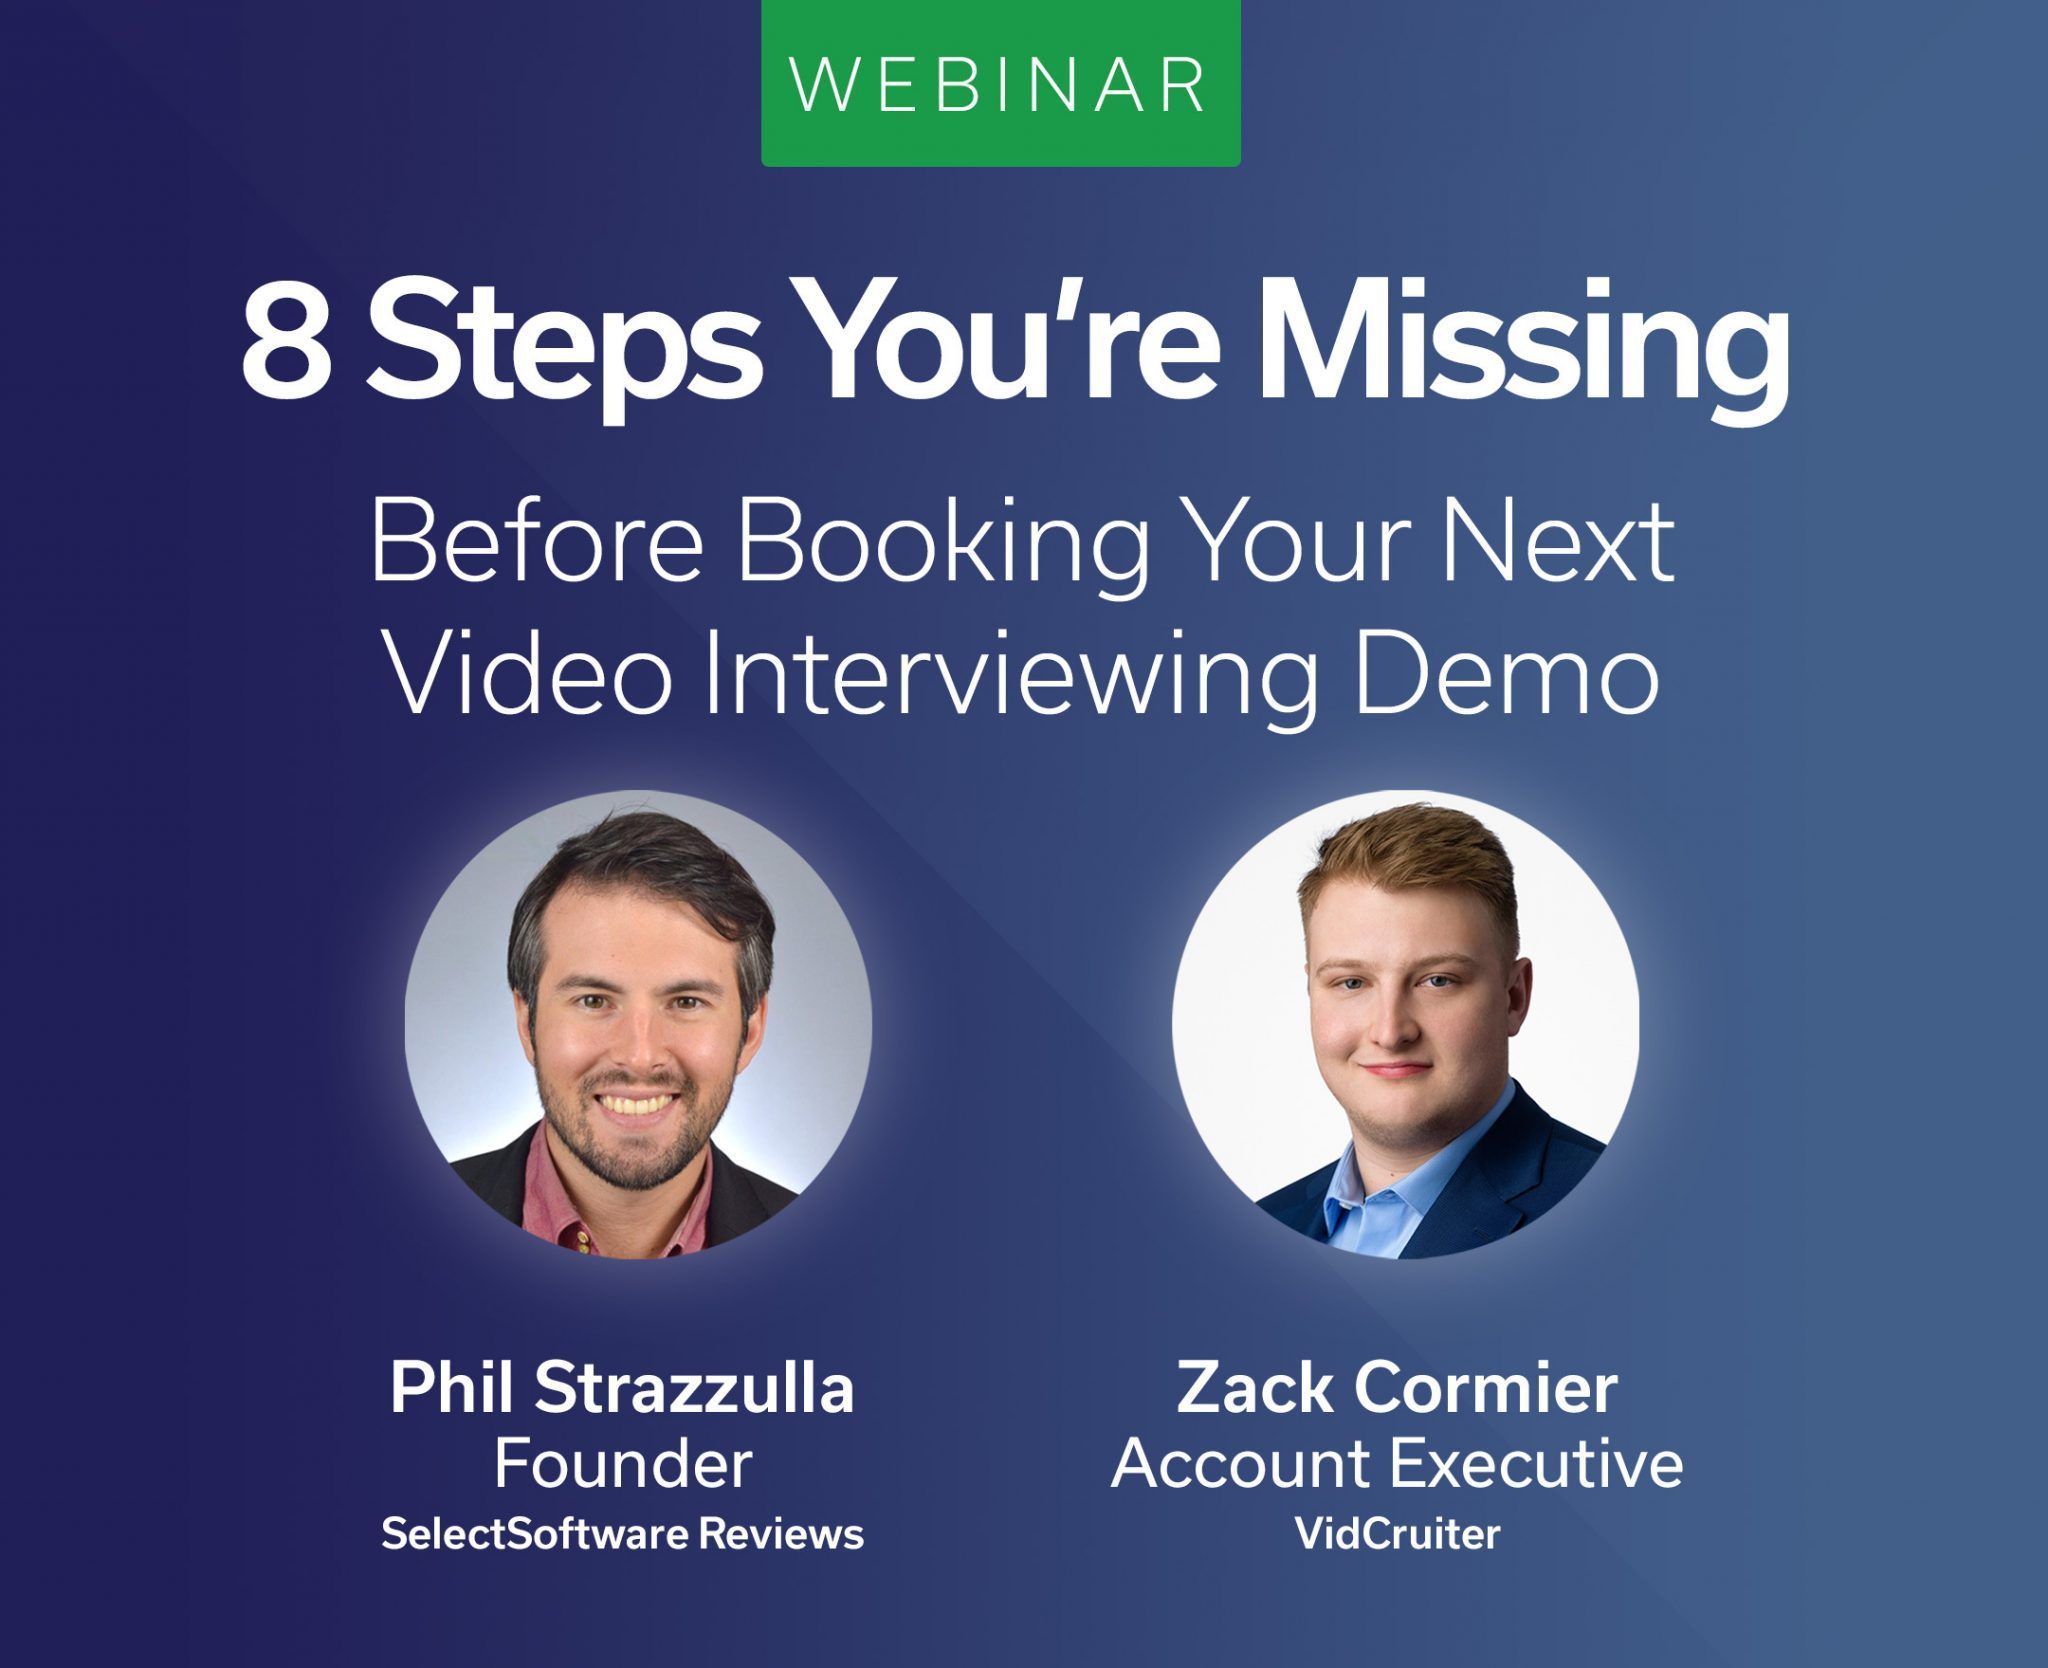 8 Steps You’re Missing Before Booking Your Demo